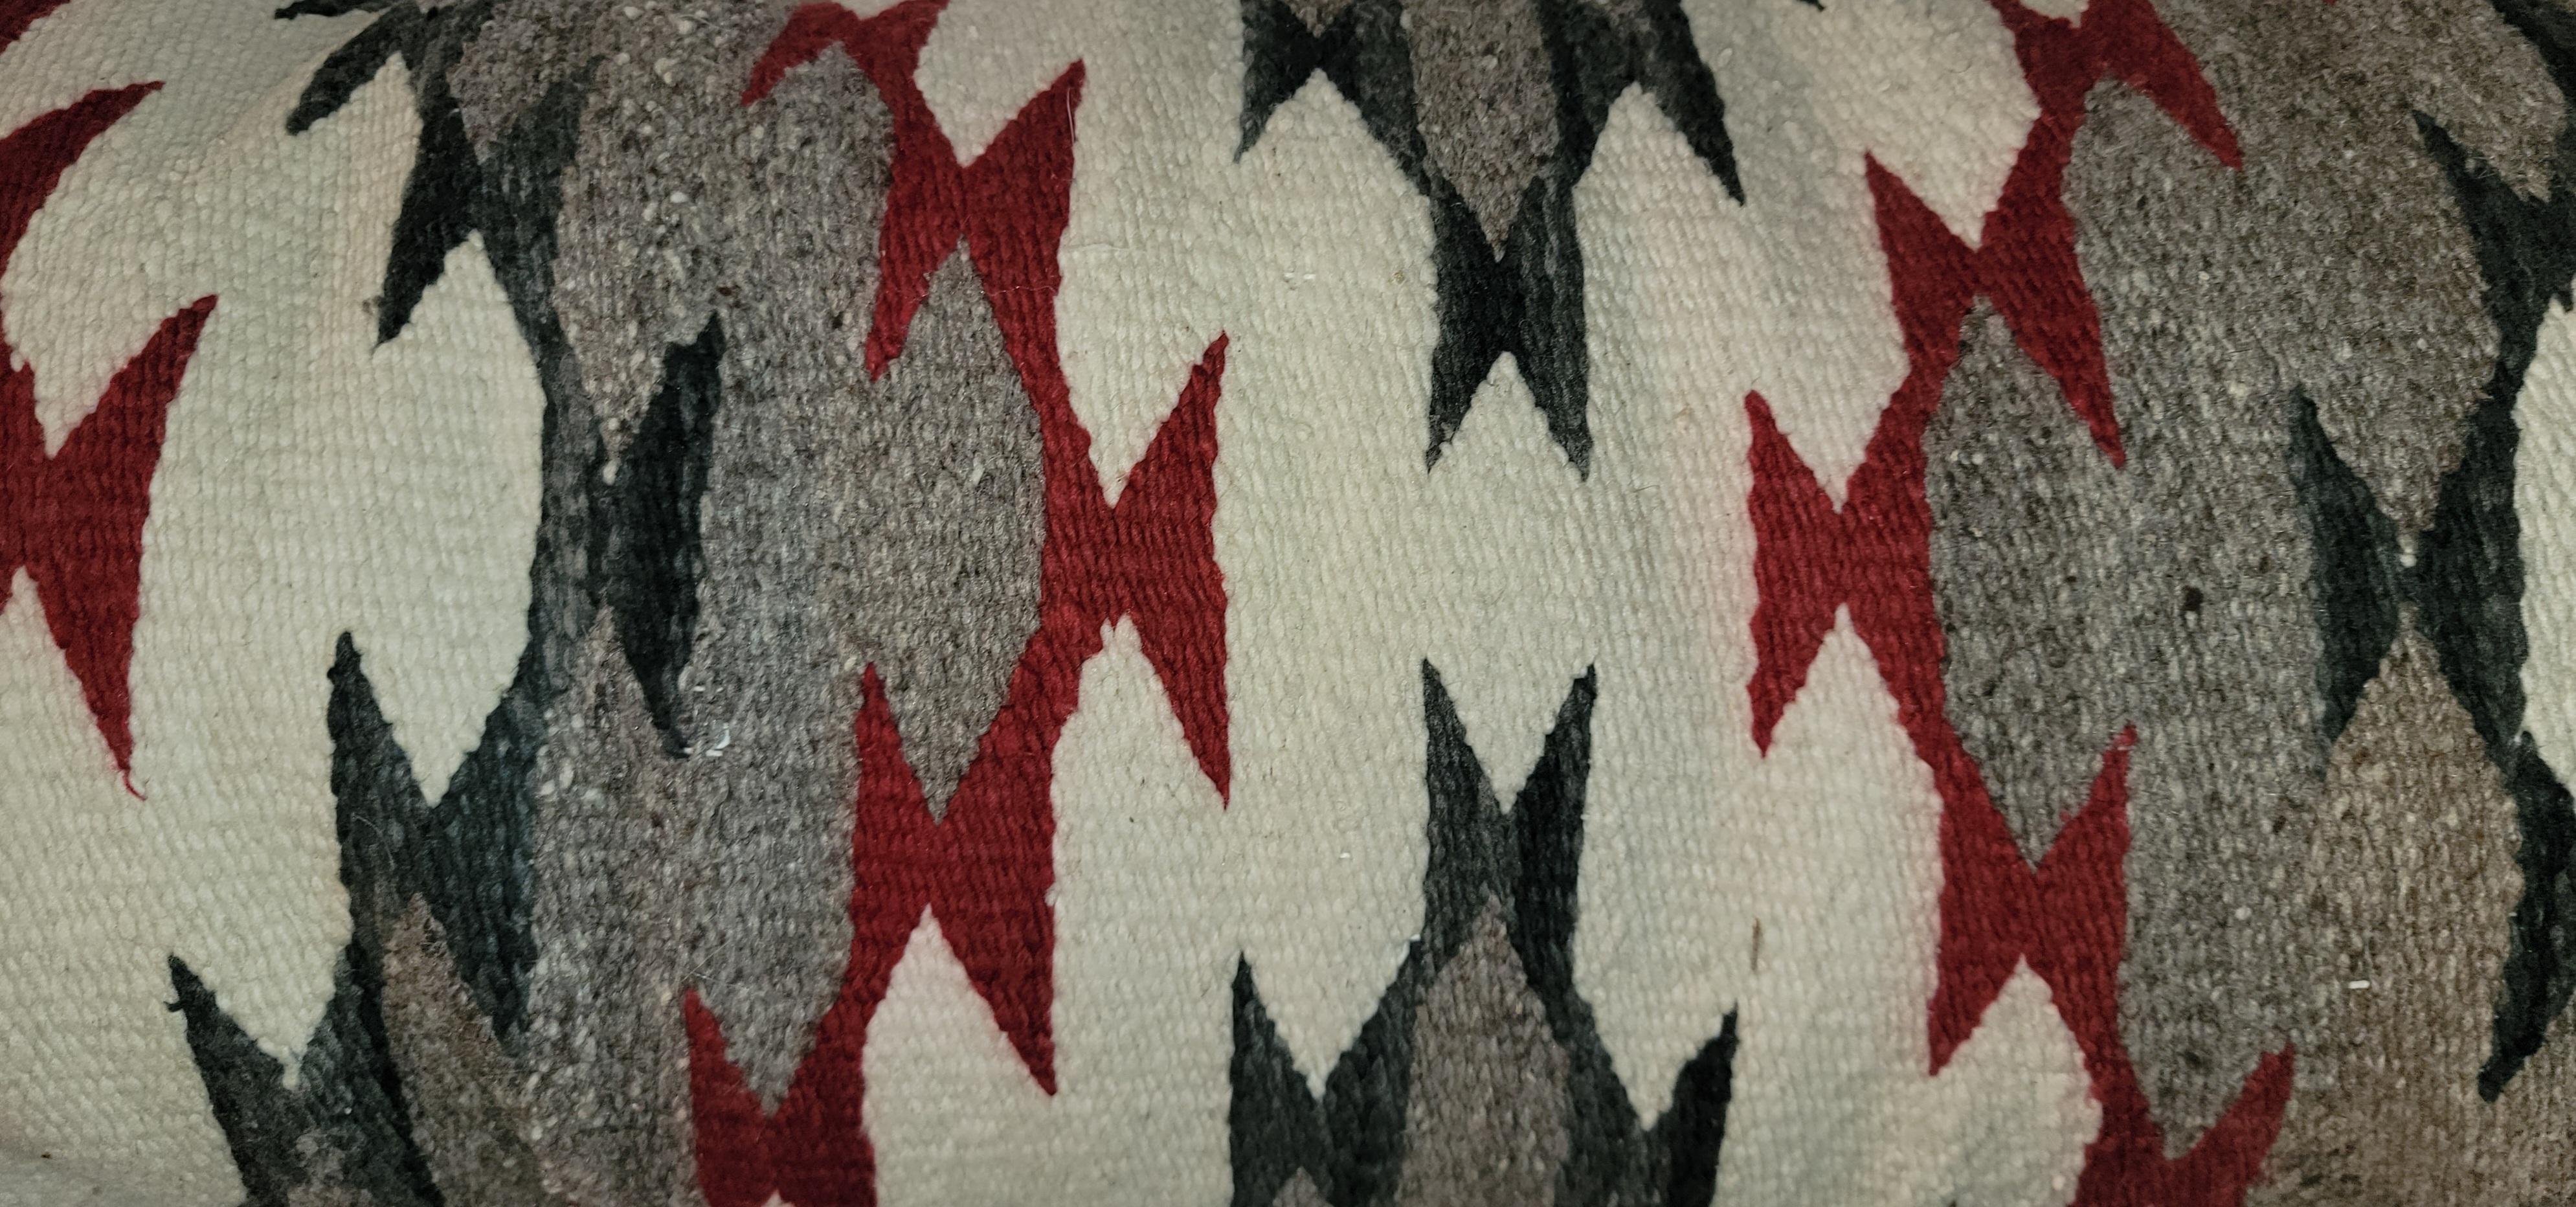 Navajo Indian Weaving eye dazzler pillows (Pair) Beautiful Colors of Black, White, Red, Taupe. This pillow is definitely and eye catcher. Feather and down insert and zippered casing.